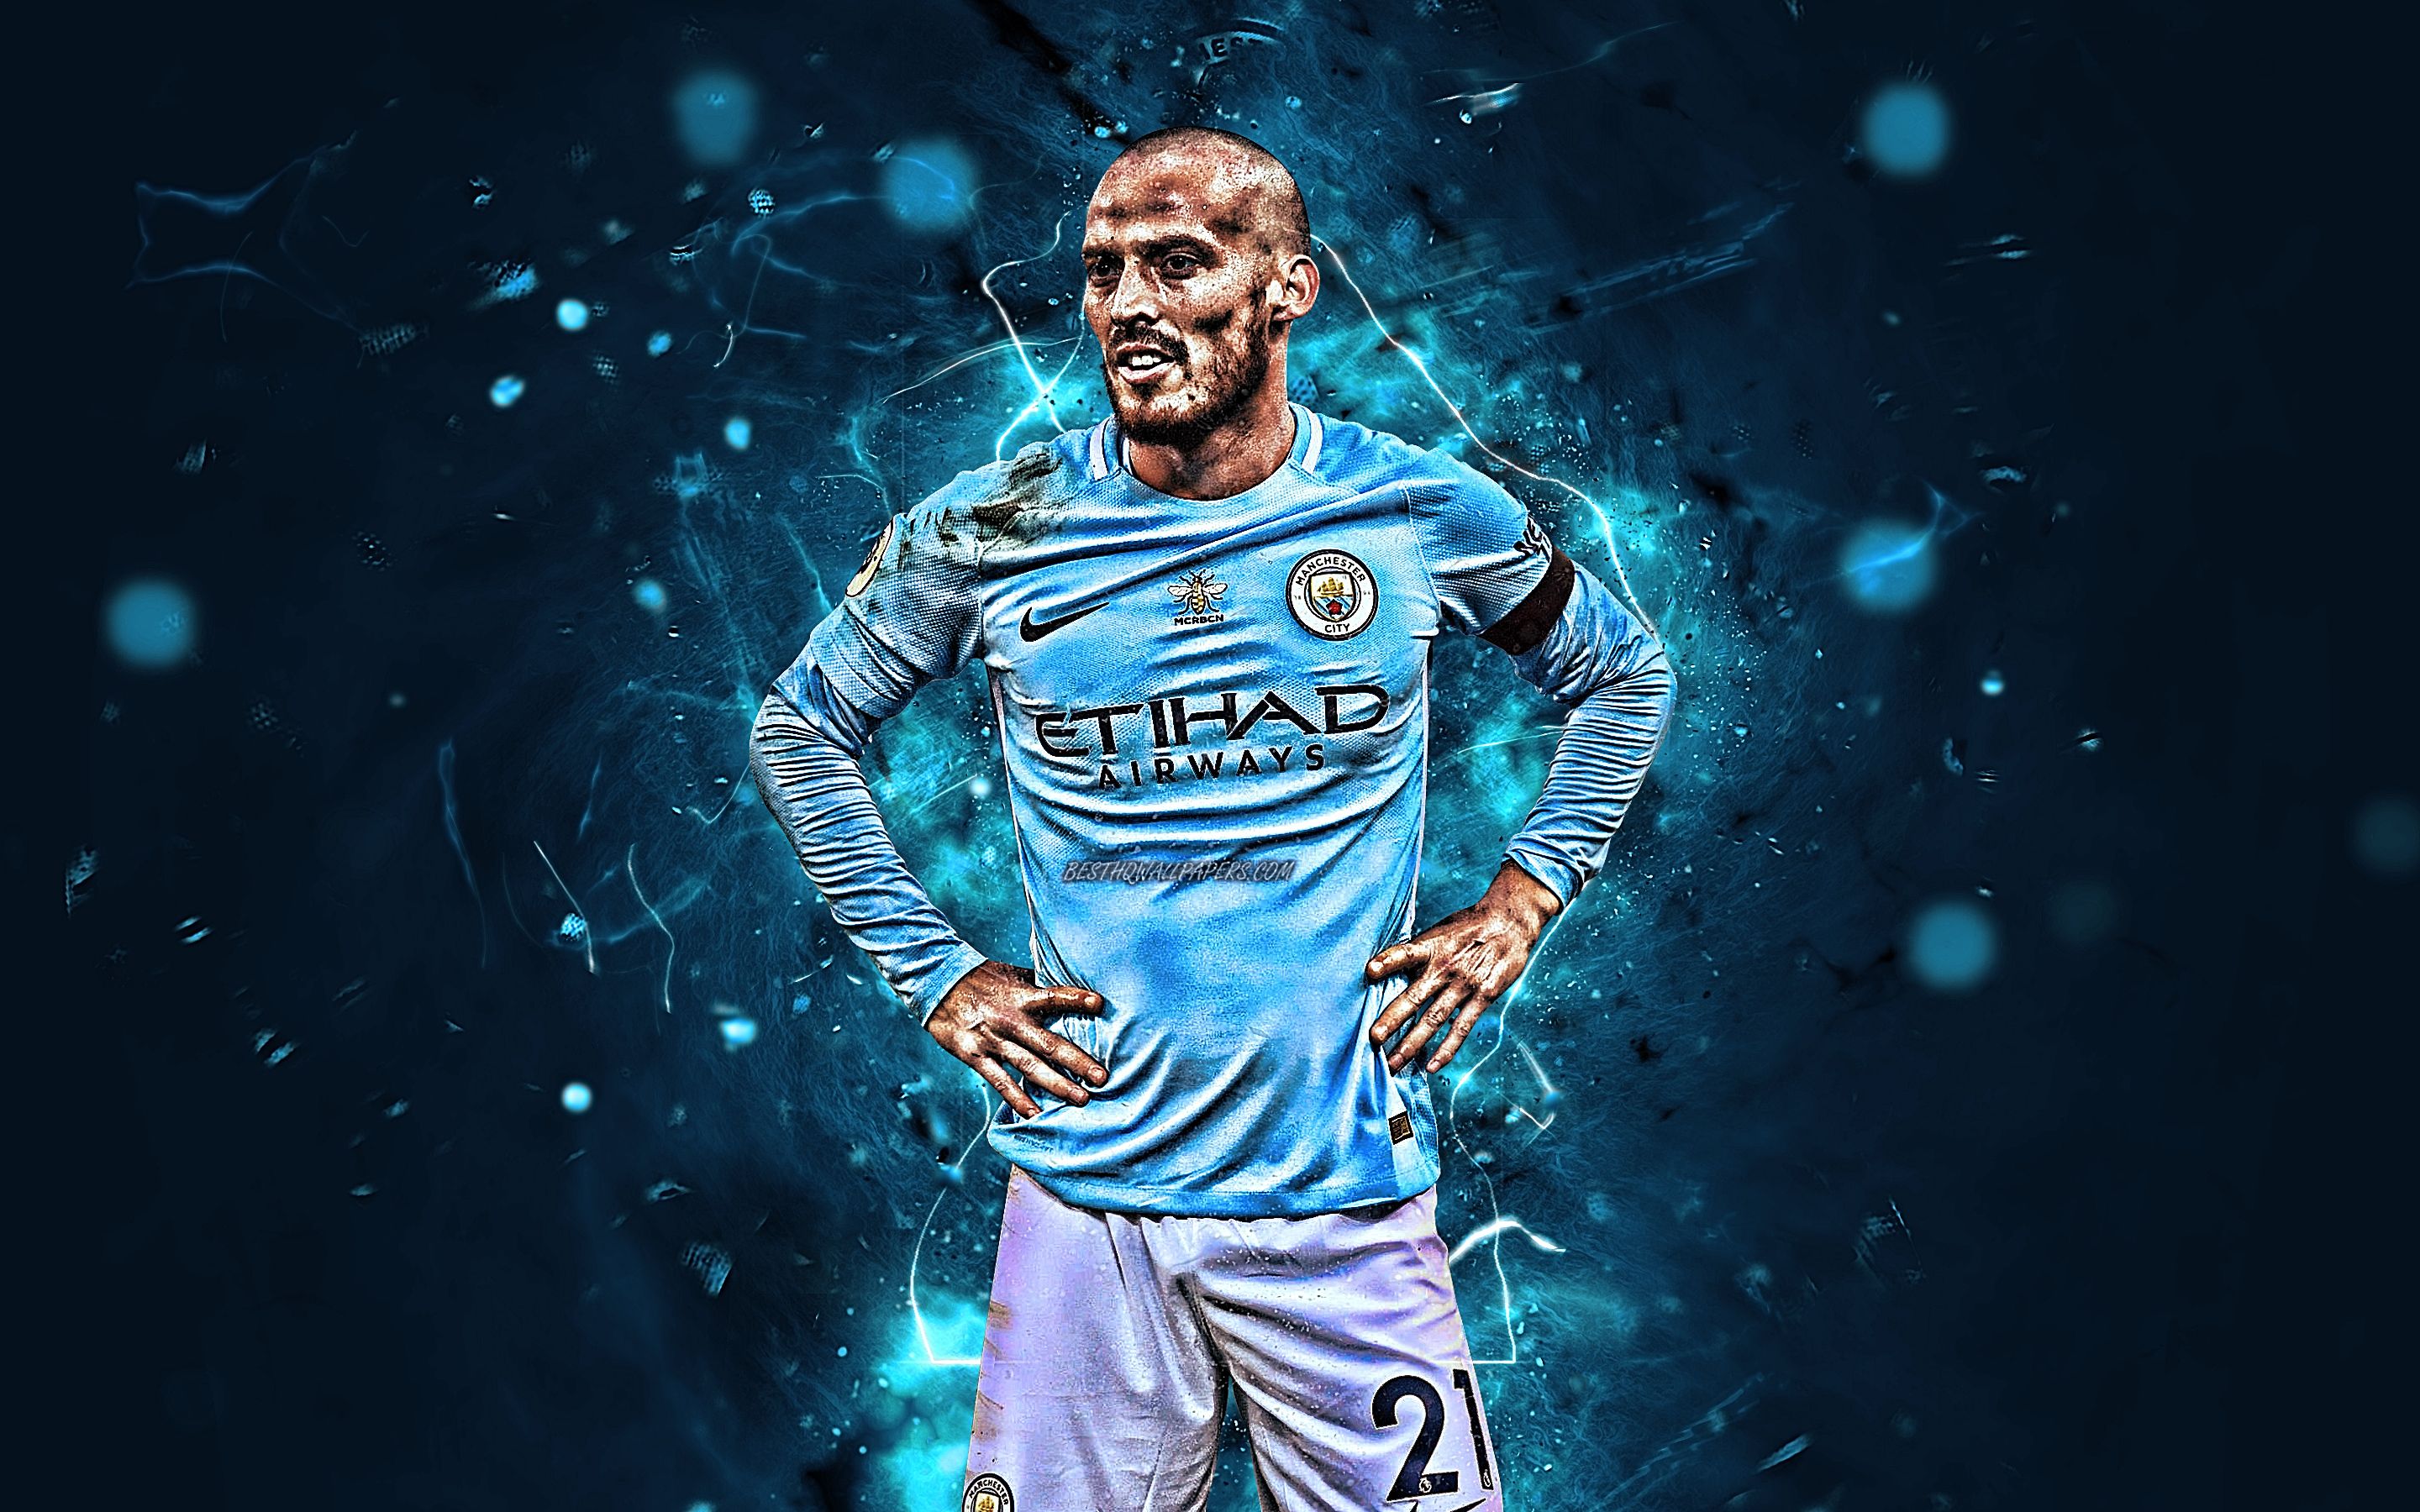 Download Wallpaper David Silva, Spanish Footballers, Manchester City FC, Close Up, Soccer, Silva, Midfielder, Premier League, Man City, Neon Lights For Desktop With Resolution 2880x1800. High Quality HD Picture Wallpaper